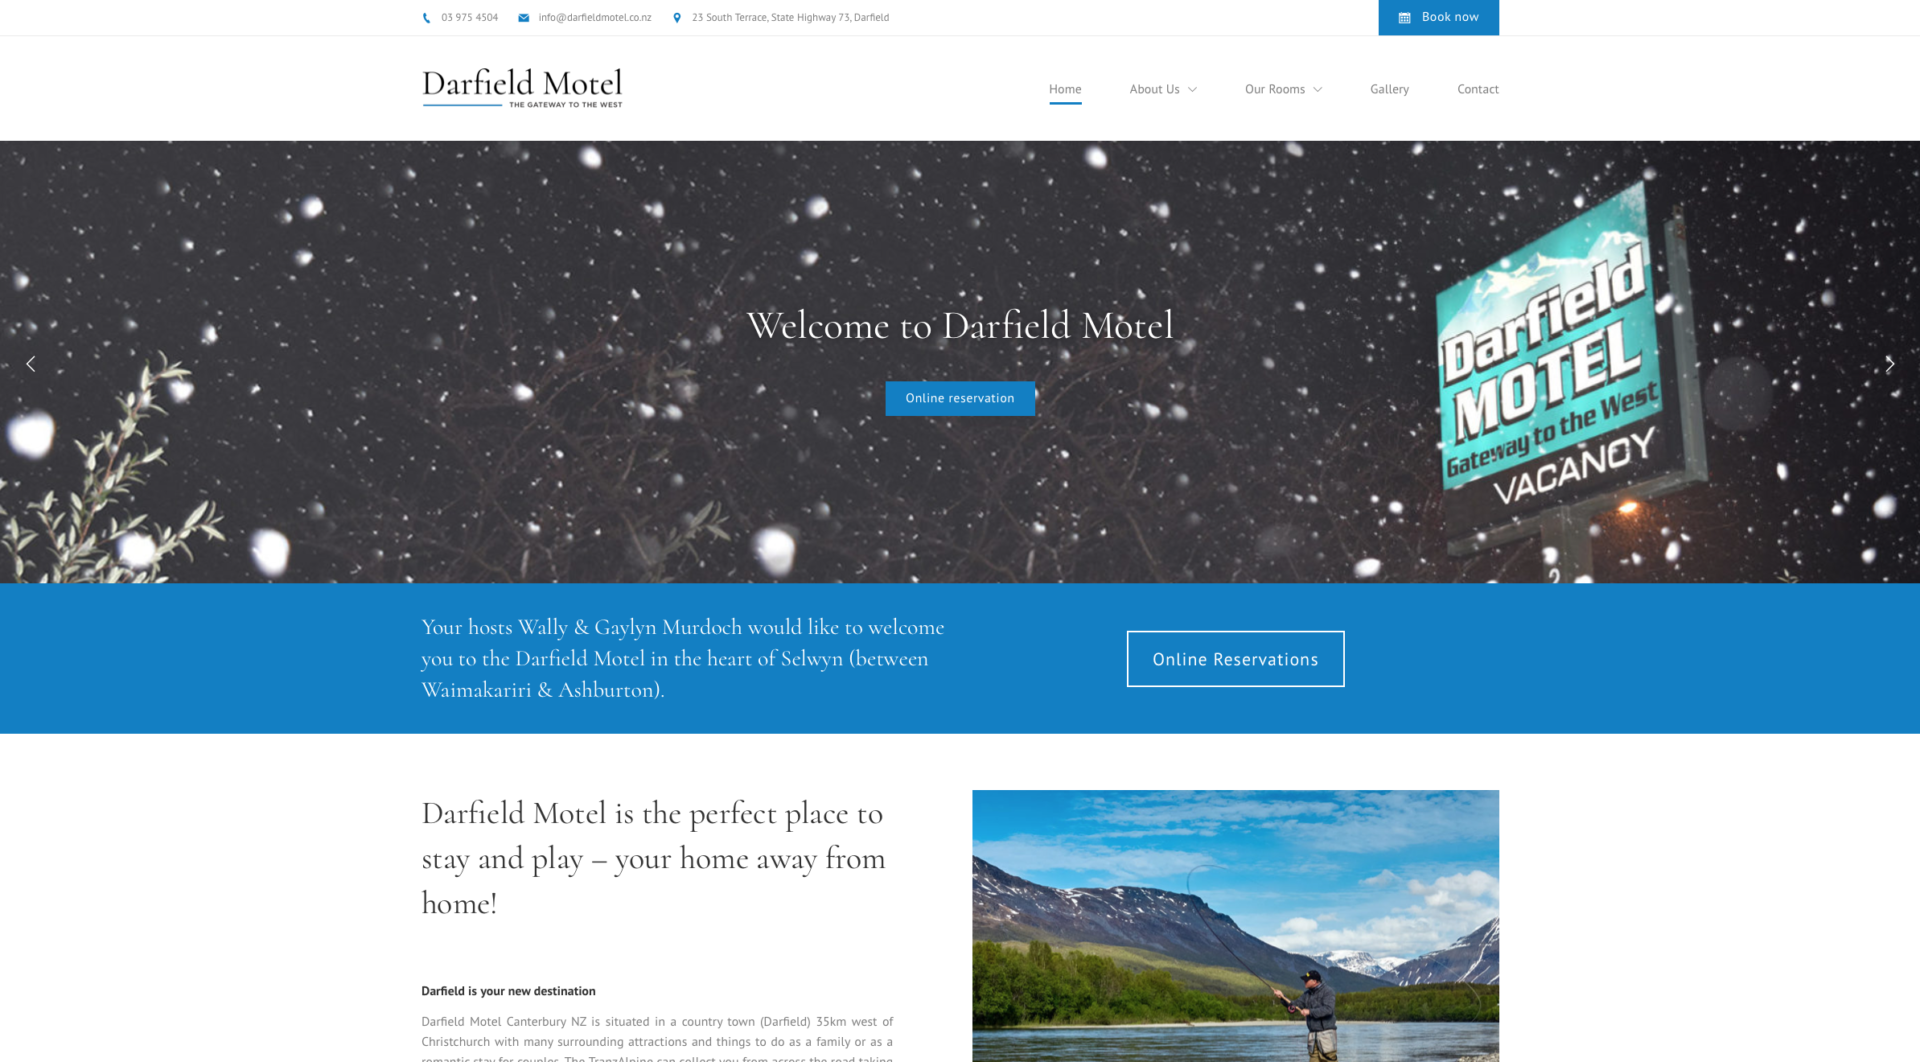 Darfield Motel New Zealand - website design and development with cool blue and orange colours symbolizing the outdoors and fresh country air. A business based in Christchurch, Canterbury This is WordPress website design trying to be more personable and friendly as a destination to stay with many fun and adventure activities to do